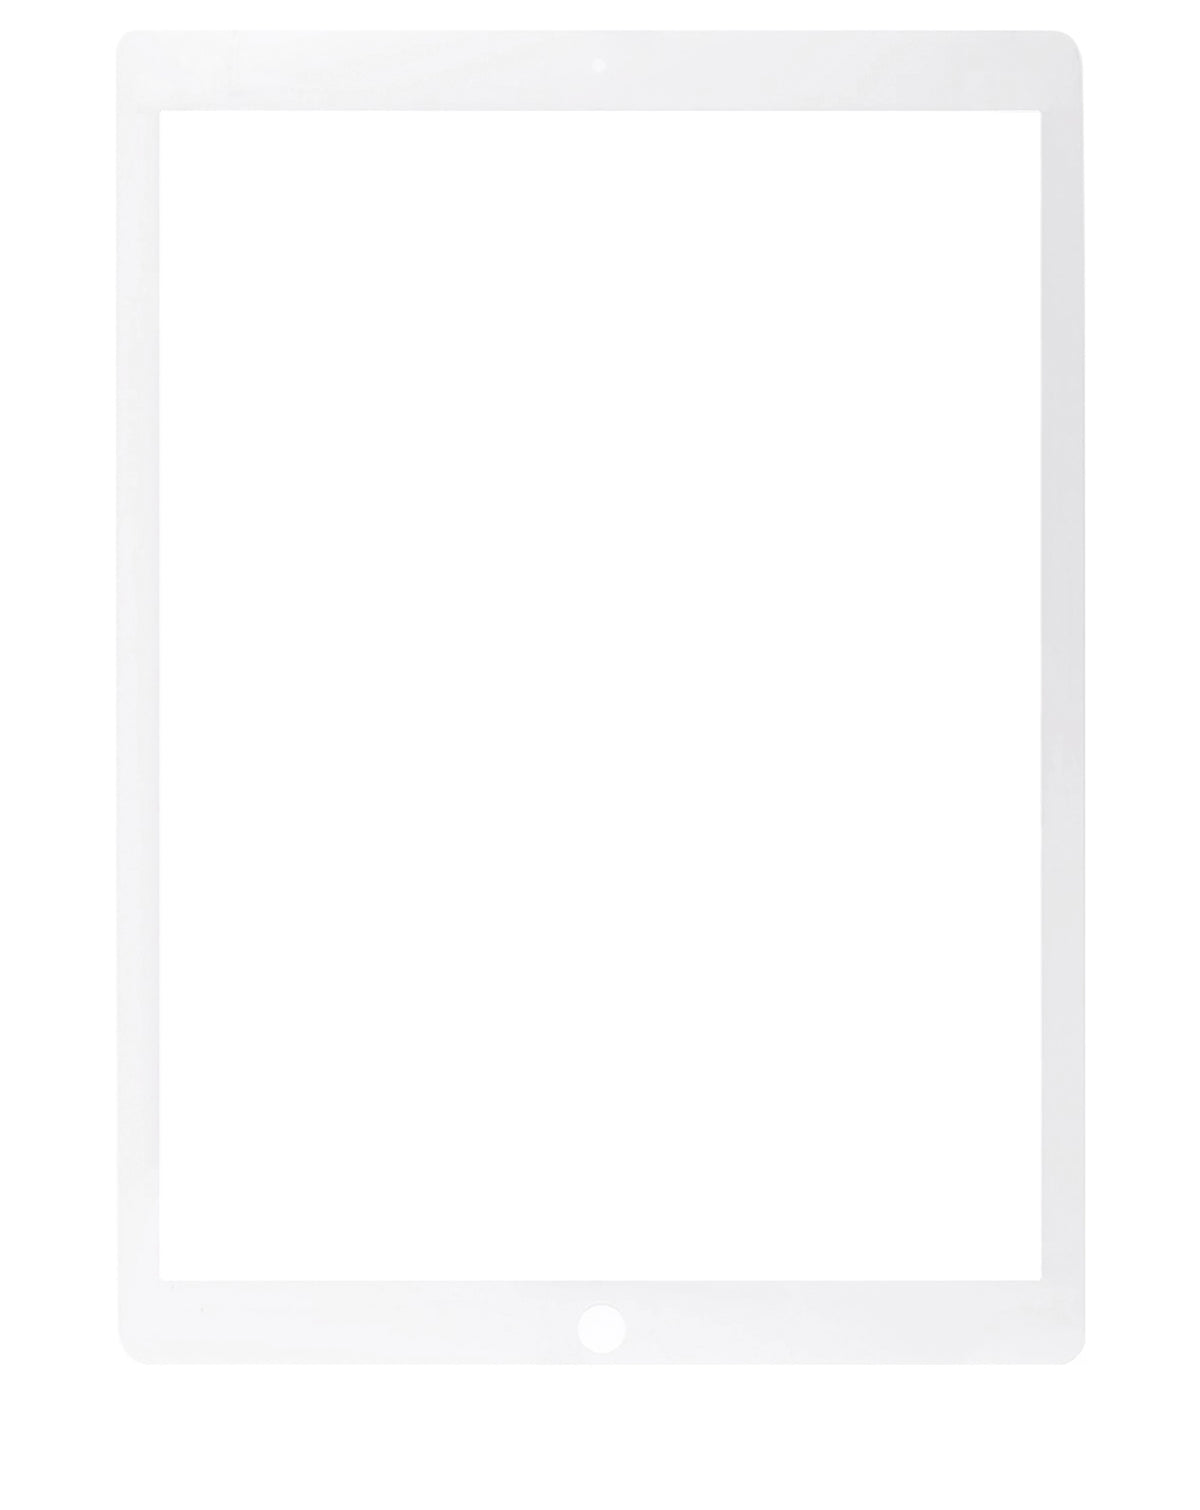 WHITE FRONT GLASS ONLY COMPATIBLE WITH IPAD PRO 12.9" 2ND GEN (2017) (GLASS SEPARATION REQUIRED)